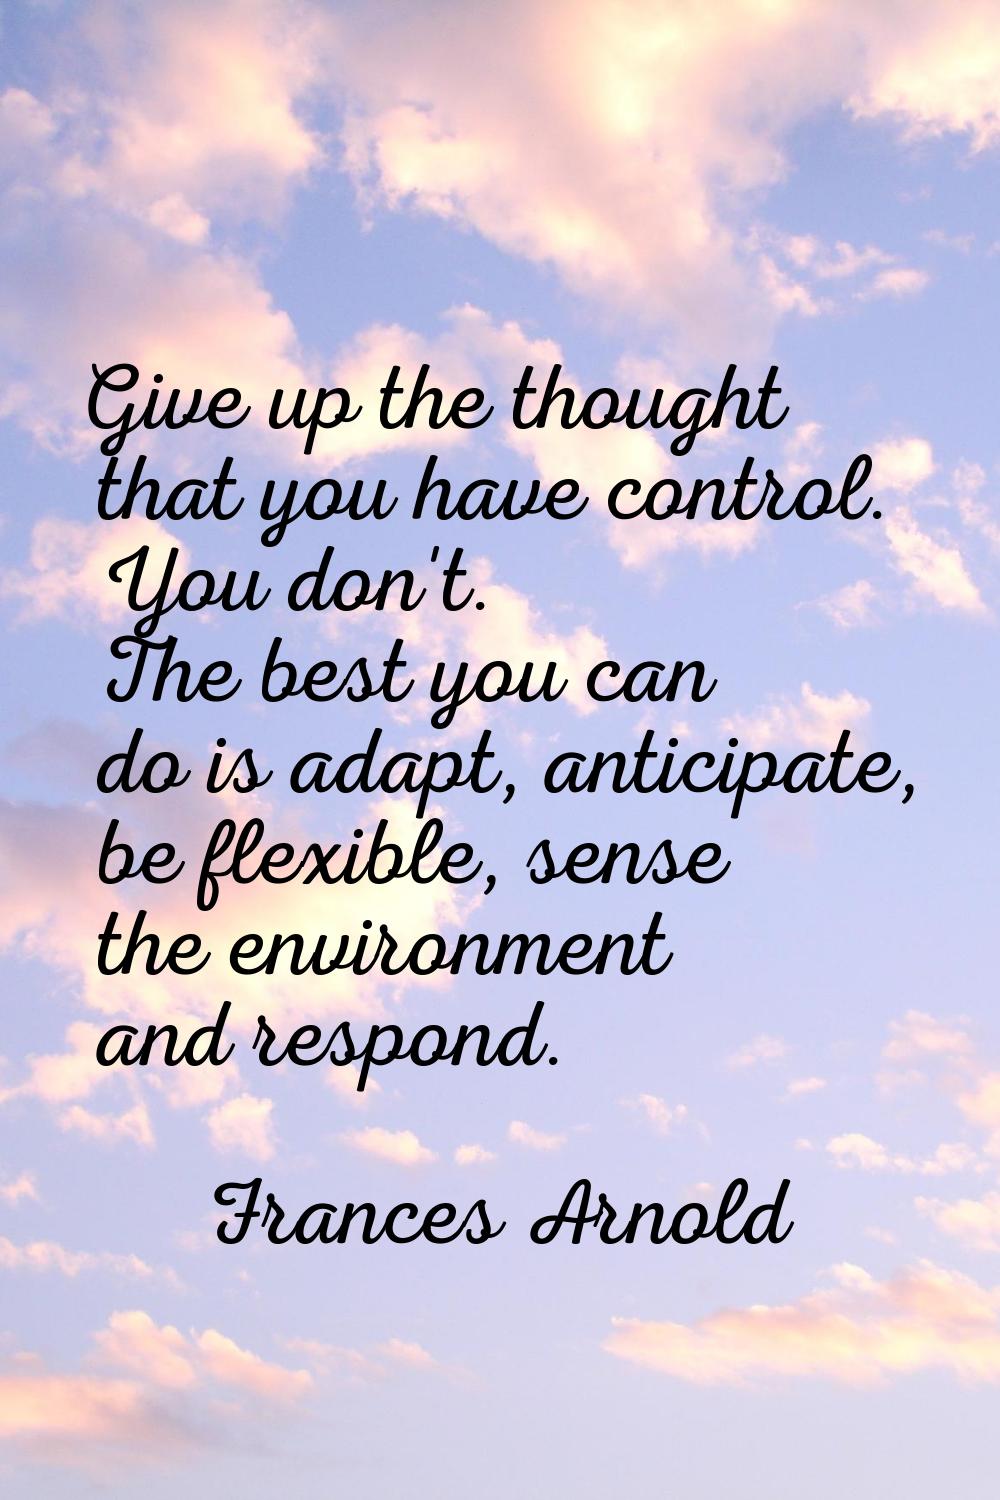 Give up the thought that you have control. You don't. The best you can do is adapt, anticipate, be 